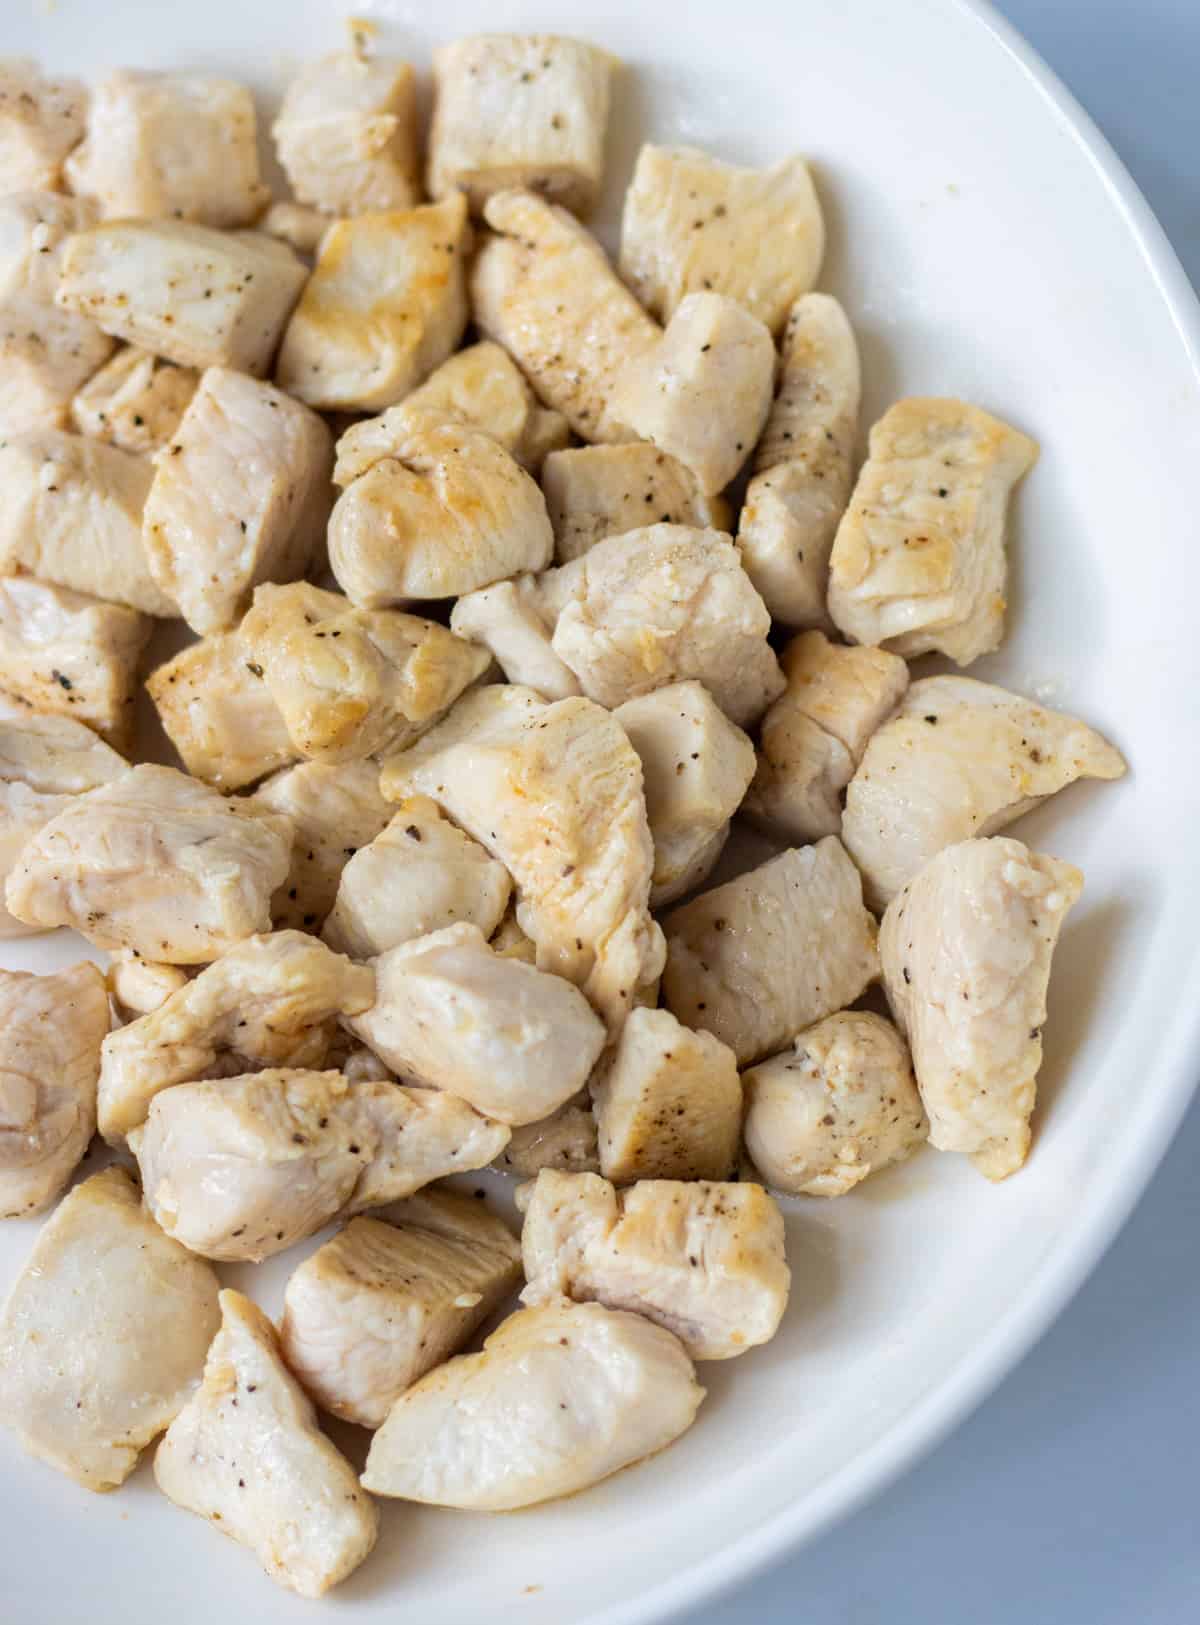 Cooked diced chicken on a plate.